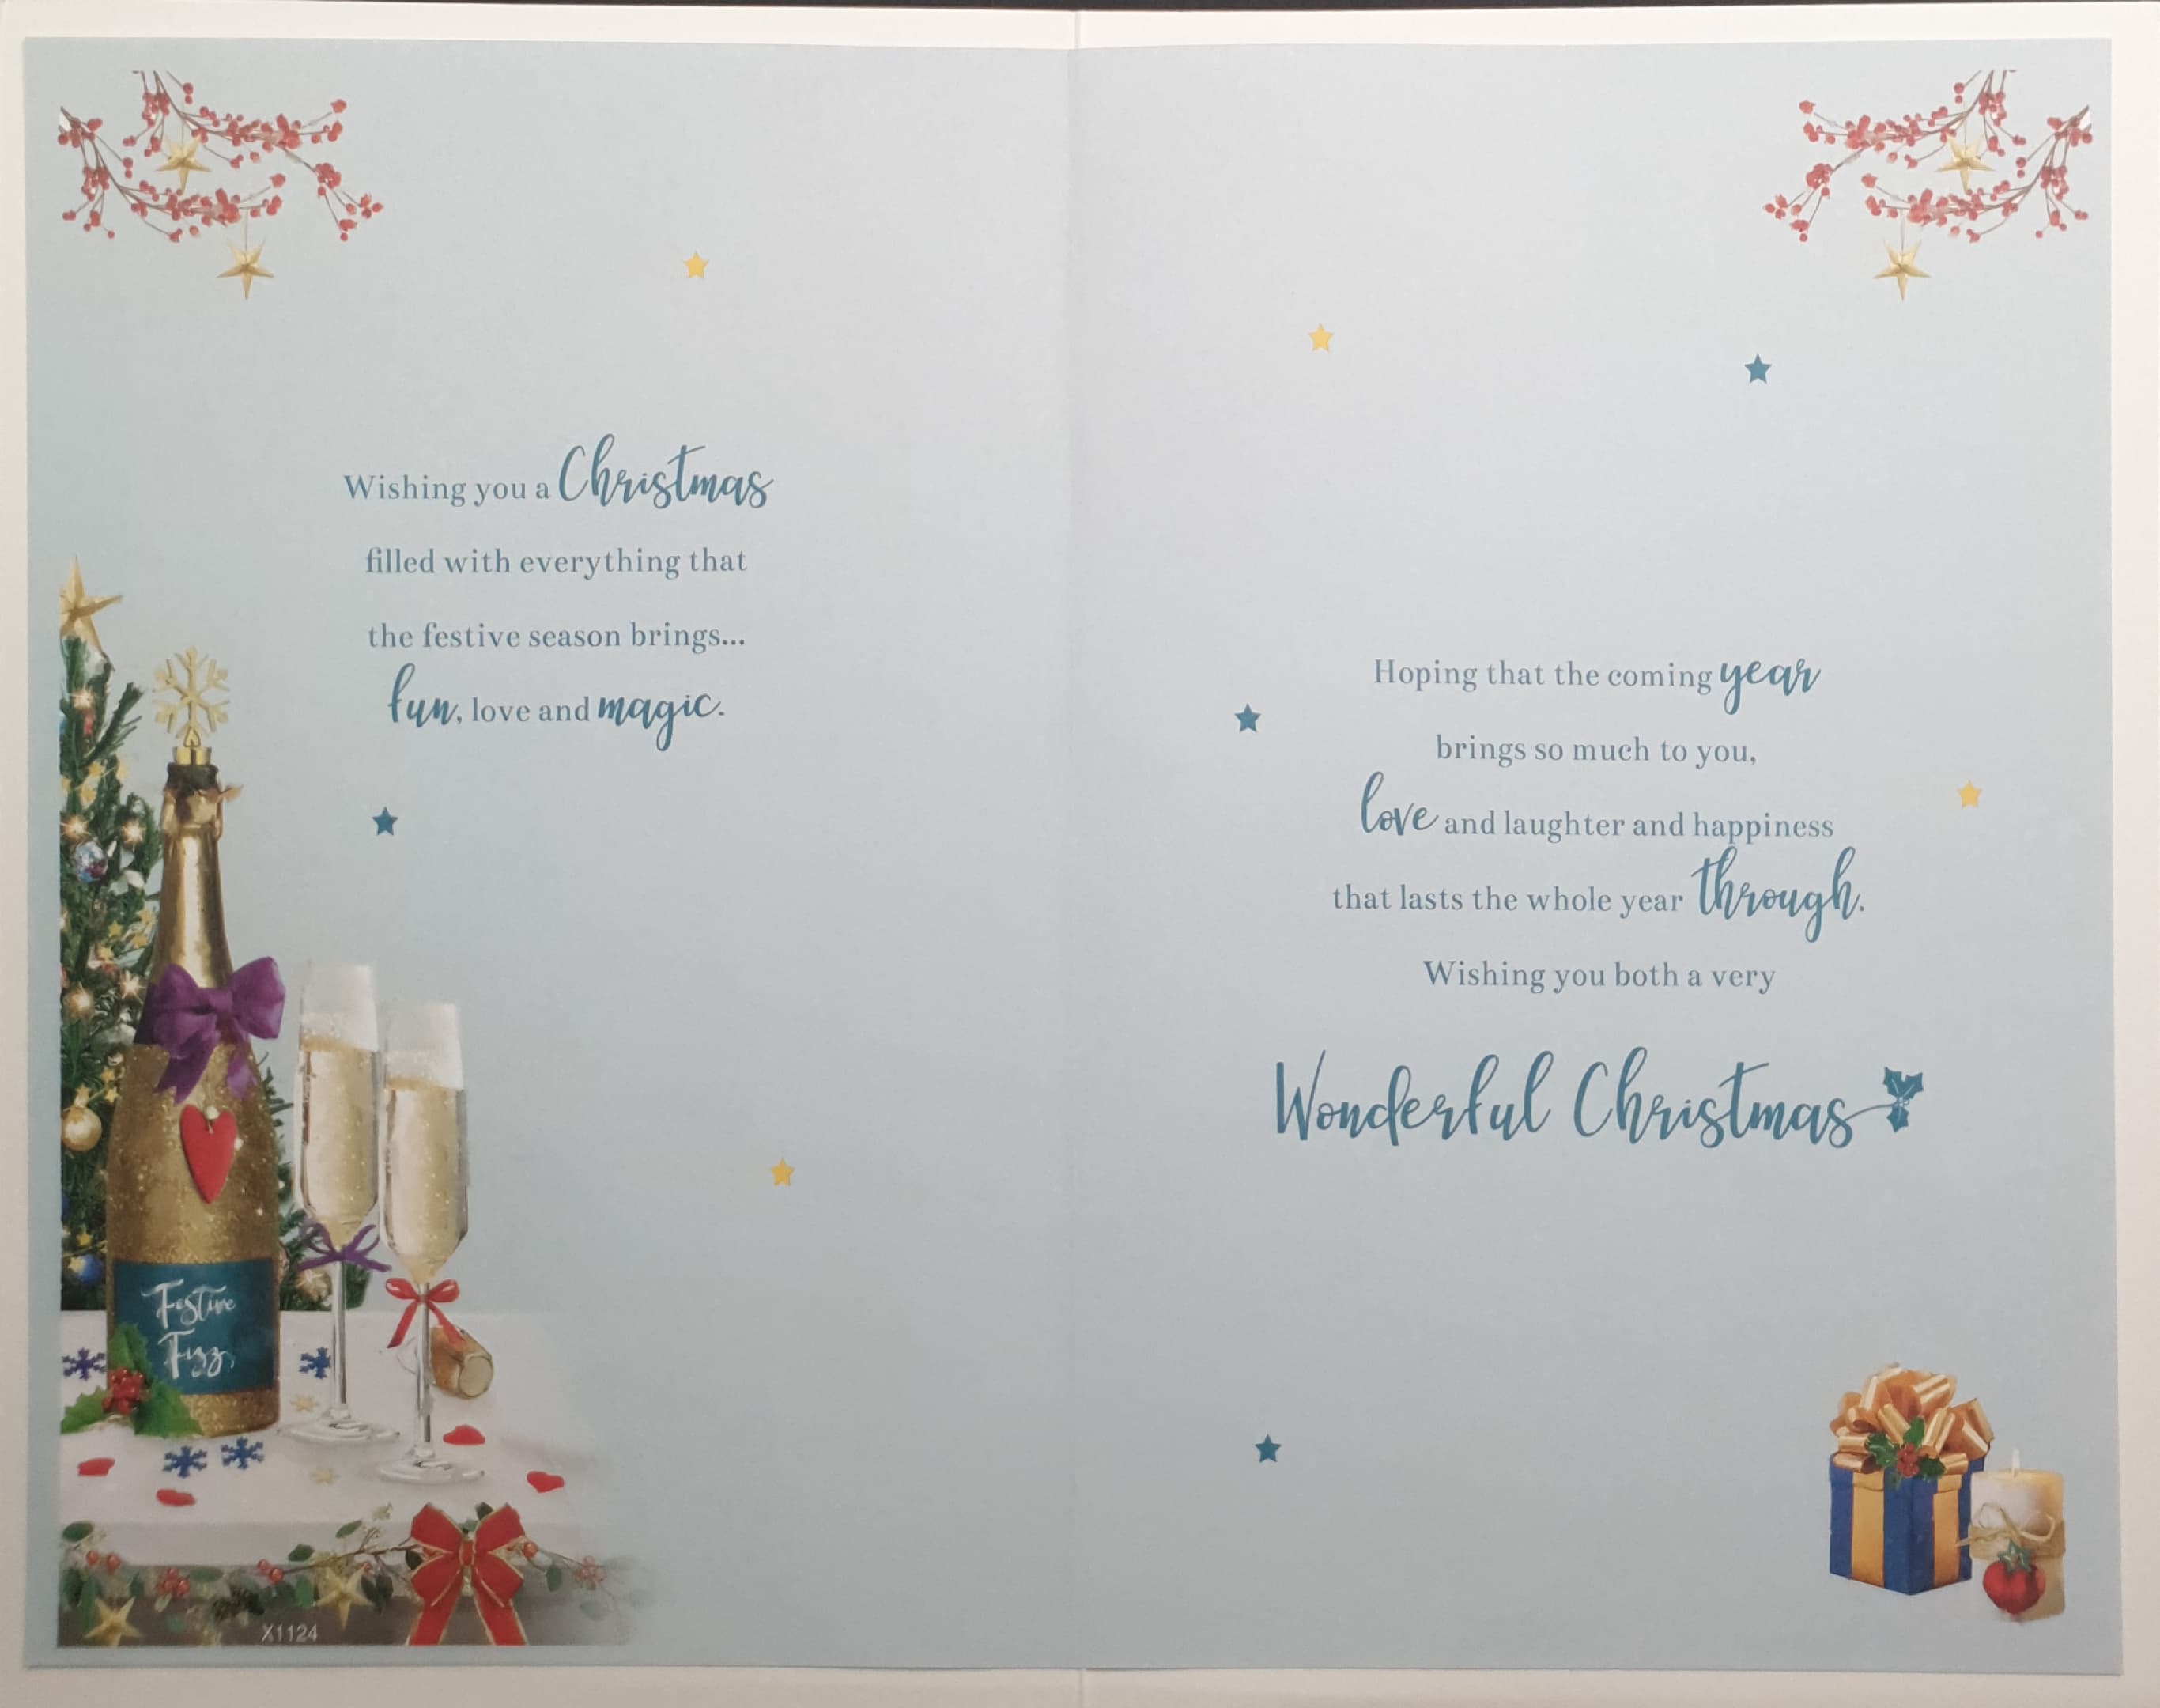 Son & Daughter in Law Christmas Card - Champagne, Ribbons & Gifts on Festive Table